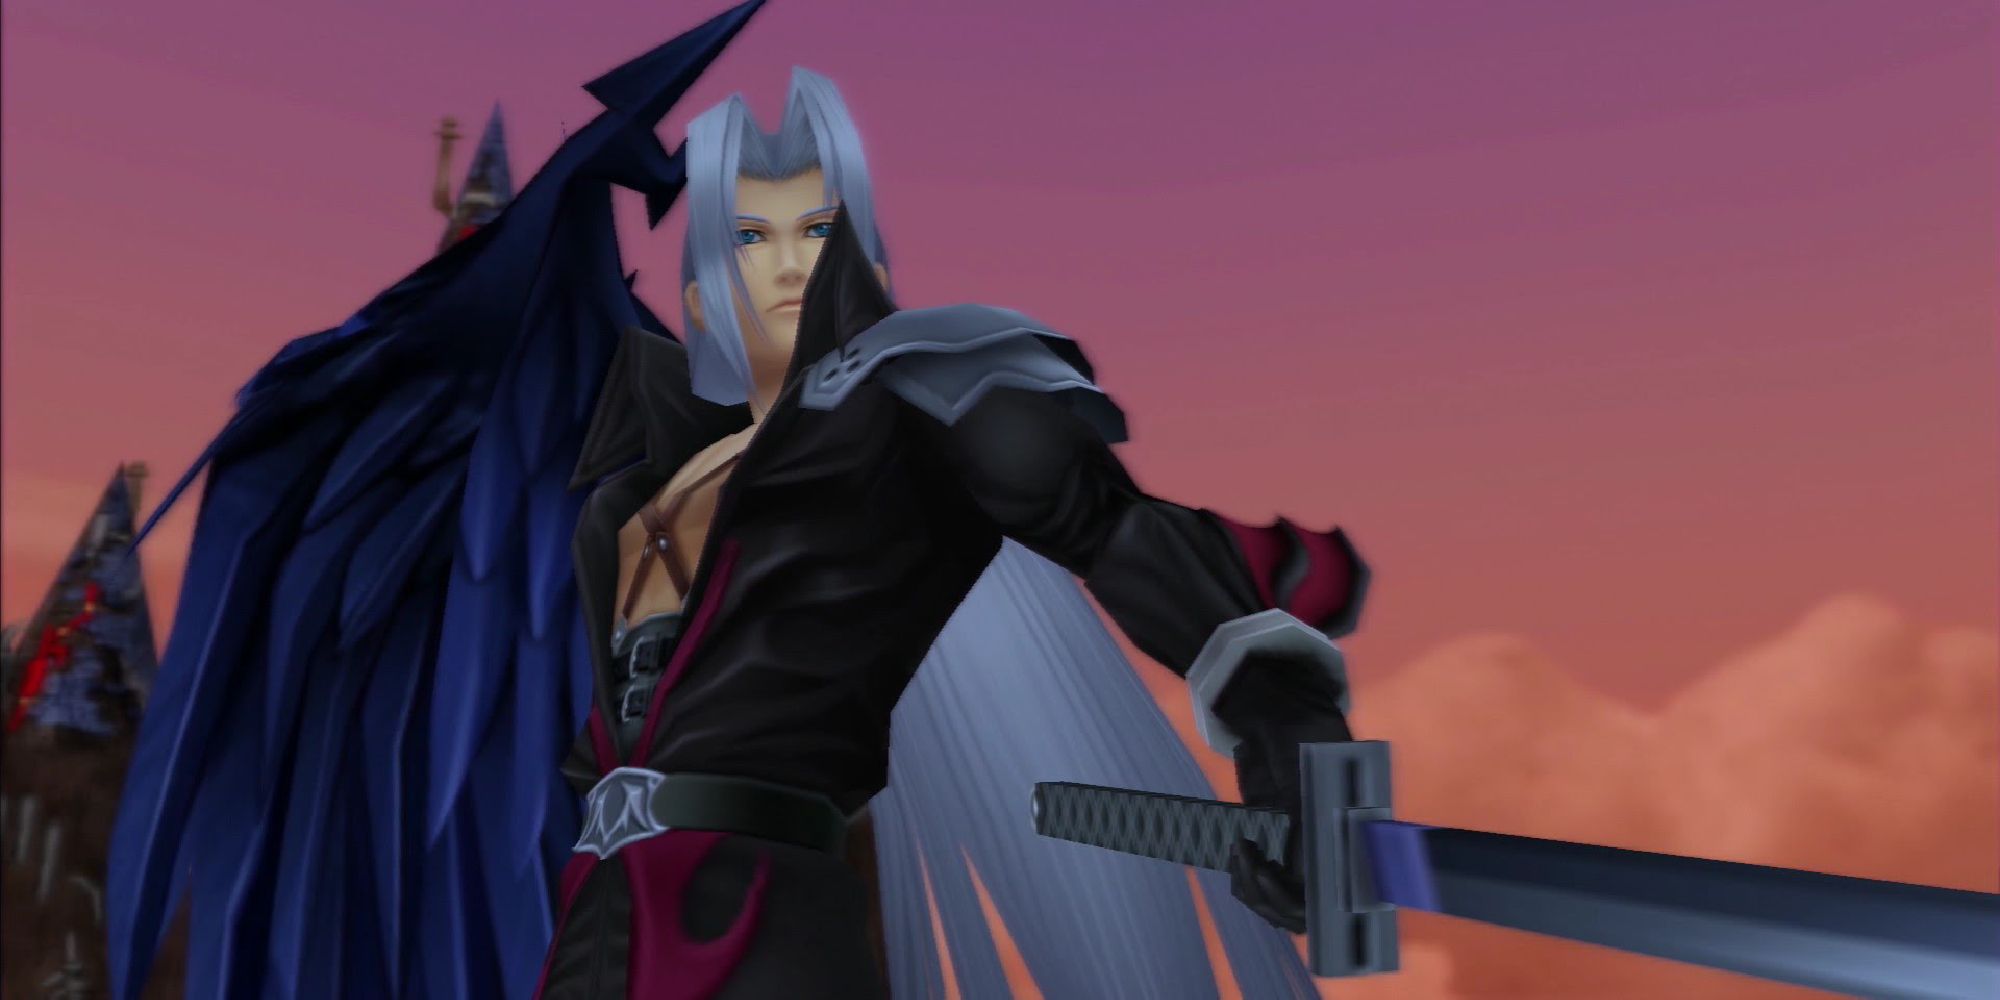 Sephiroth sporting his looks from the Kingdom Hearts series, wielding a katana.